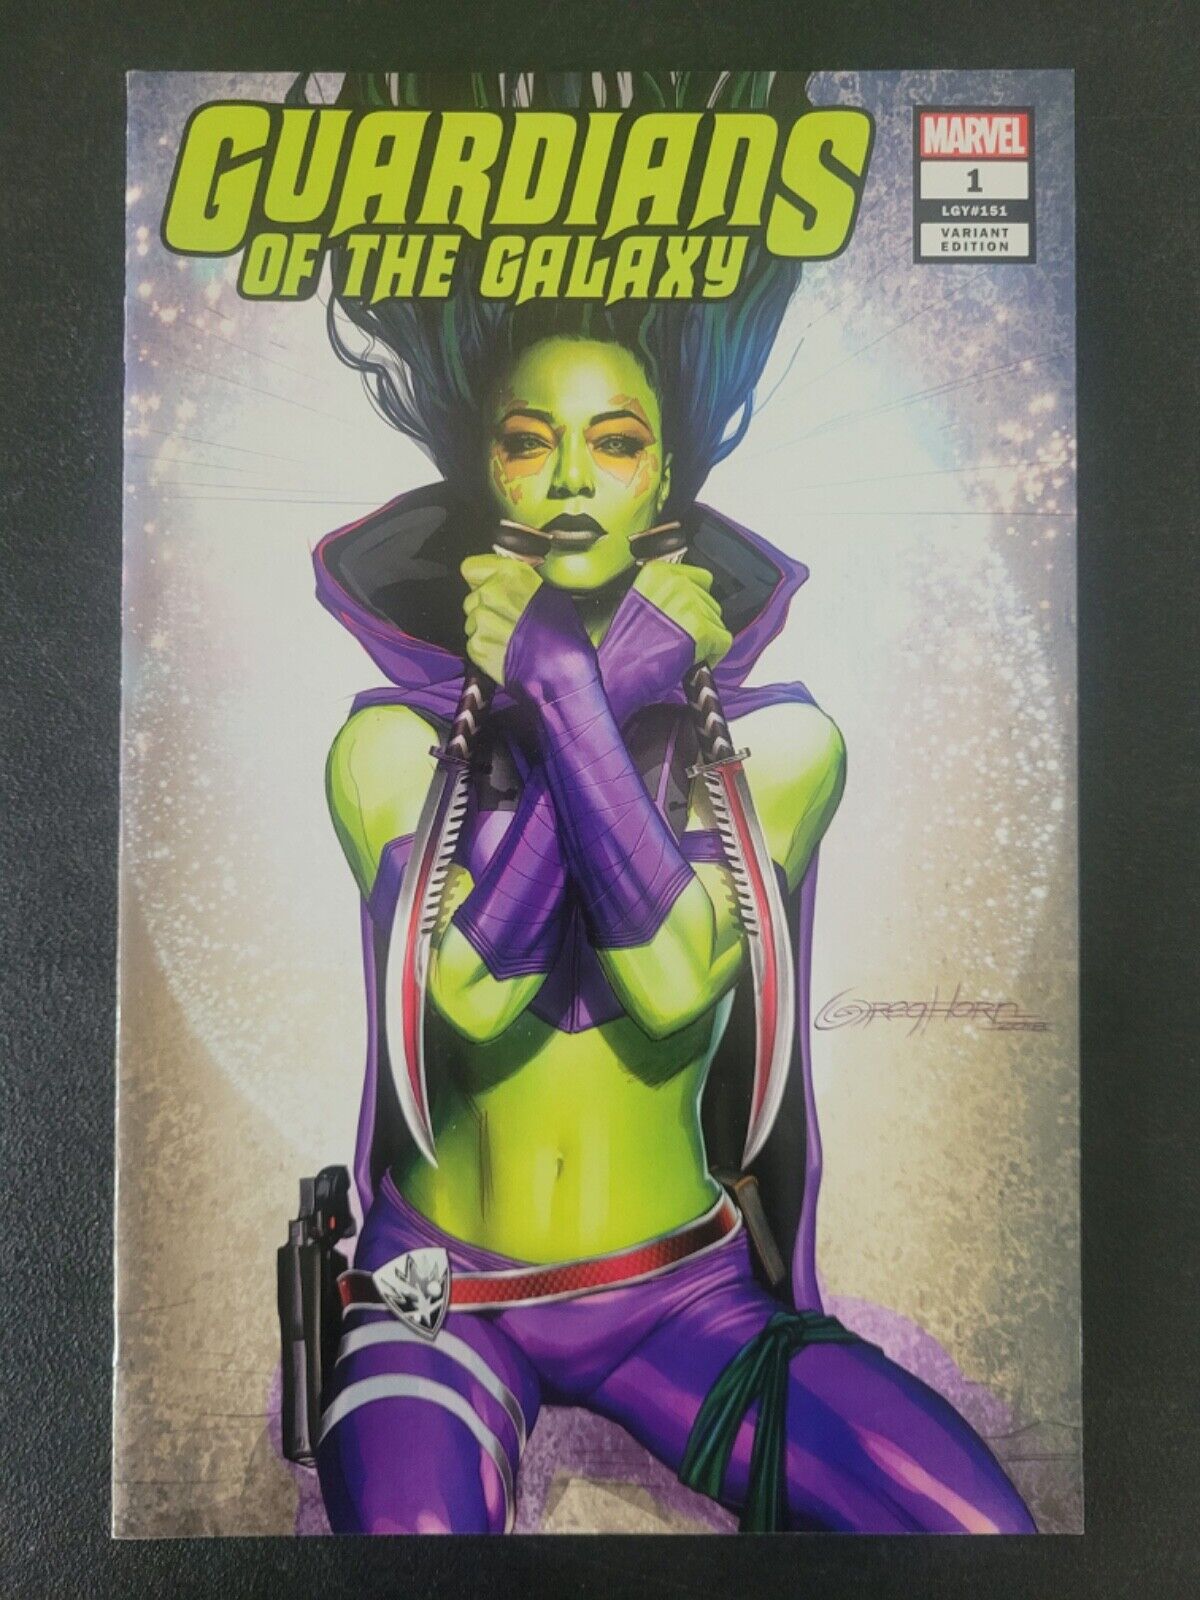 GUARDIANS OF THE GALAXY #1 (2018) MARVEL COMICS GREG HORN DEN OF DAMNED VARIANT